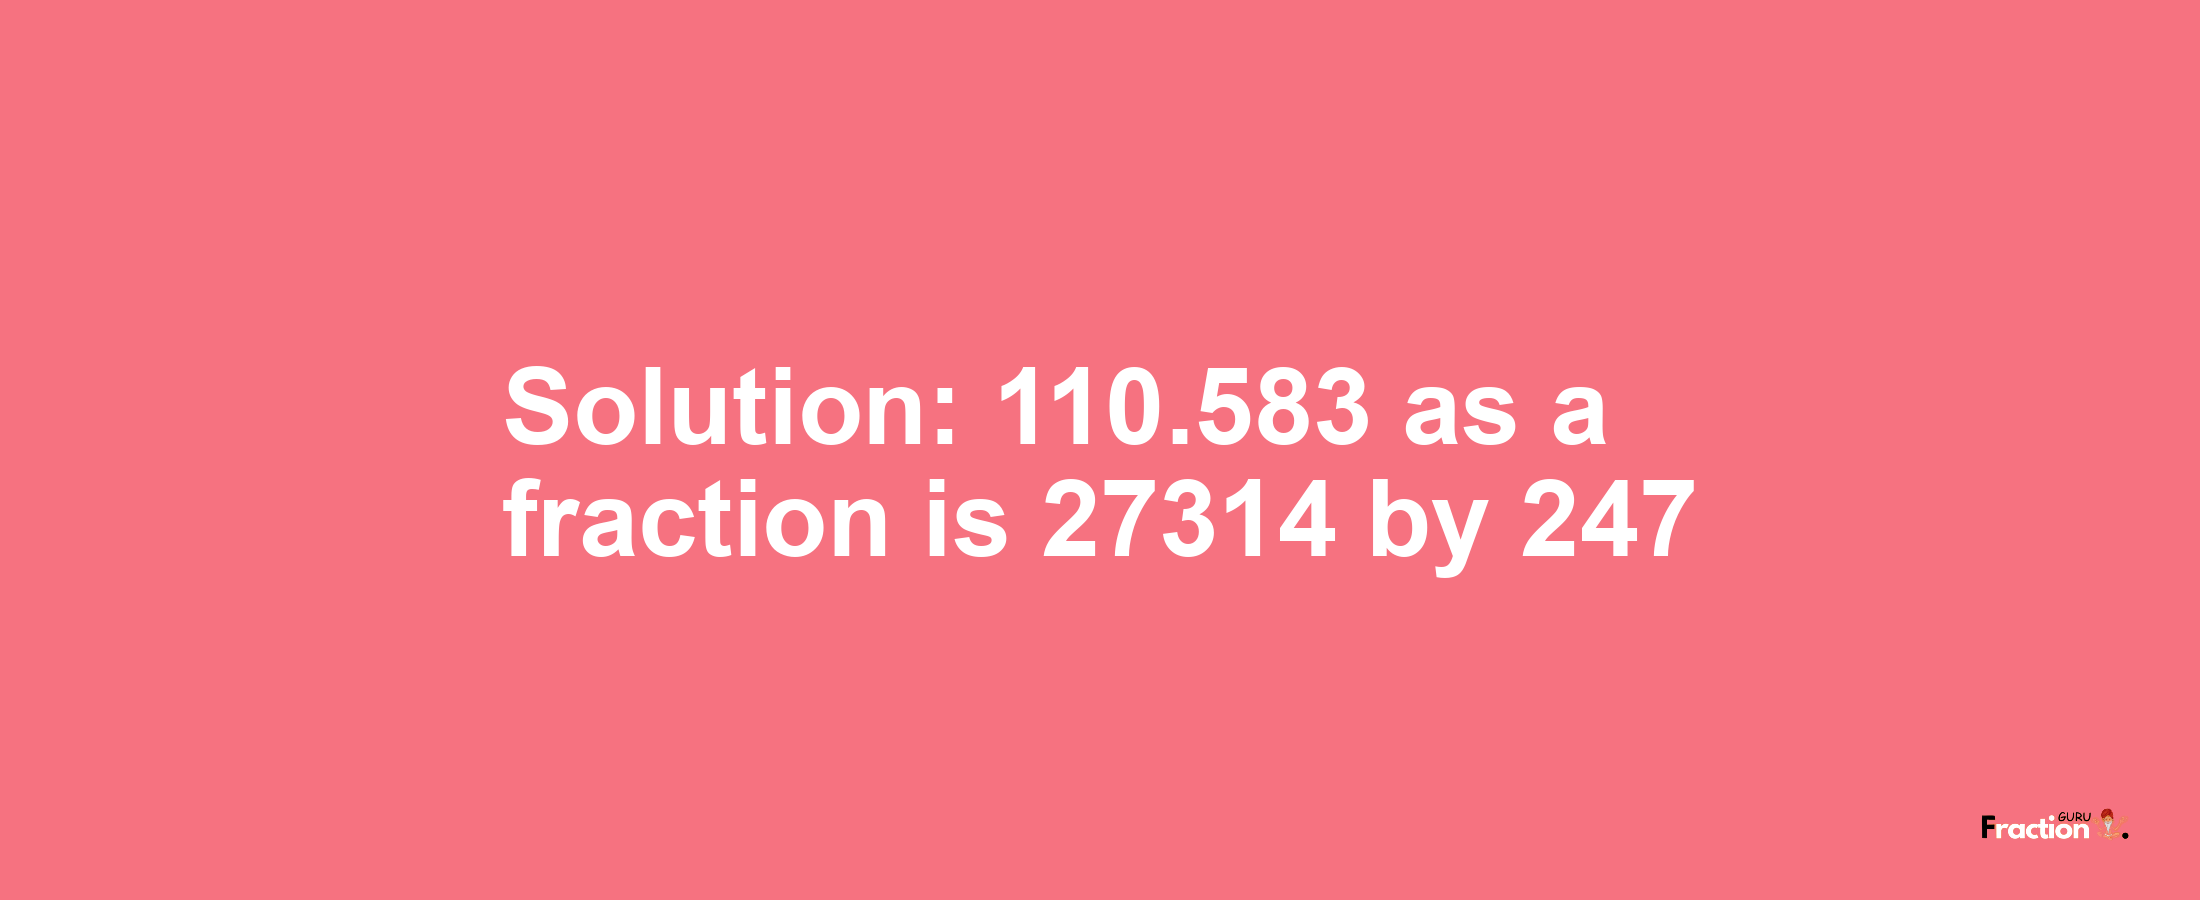 Solution:110.583 as a fraction is 27314/247